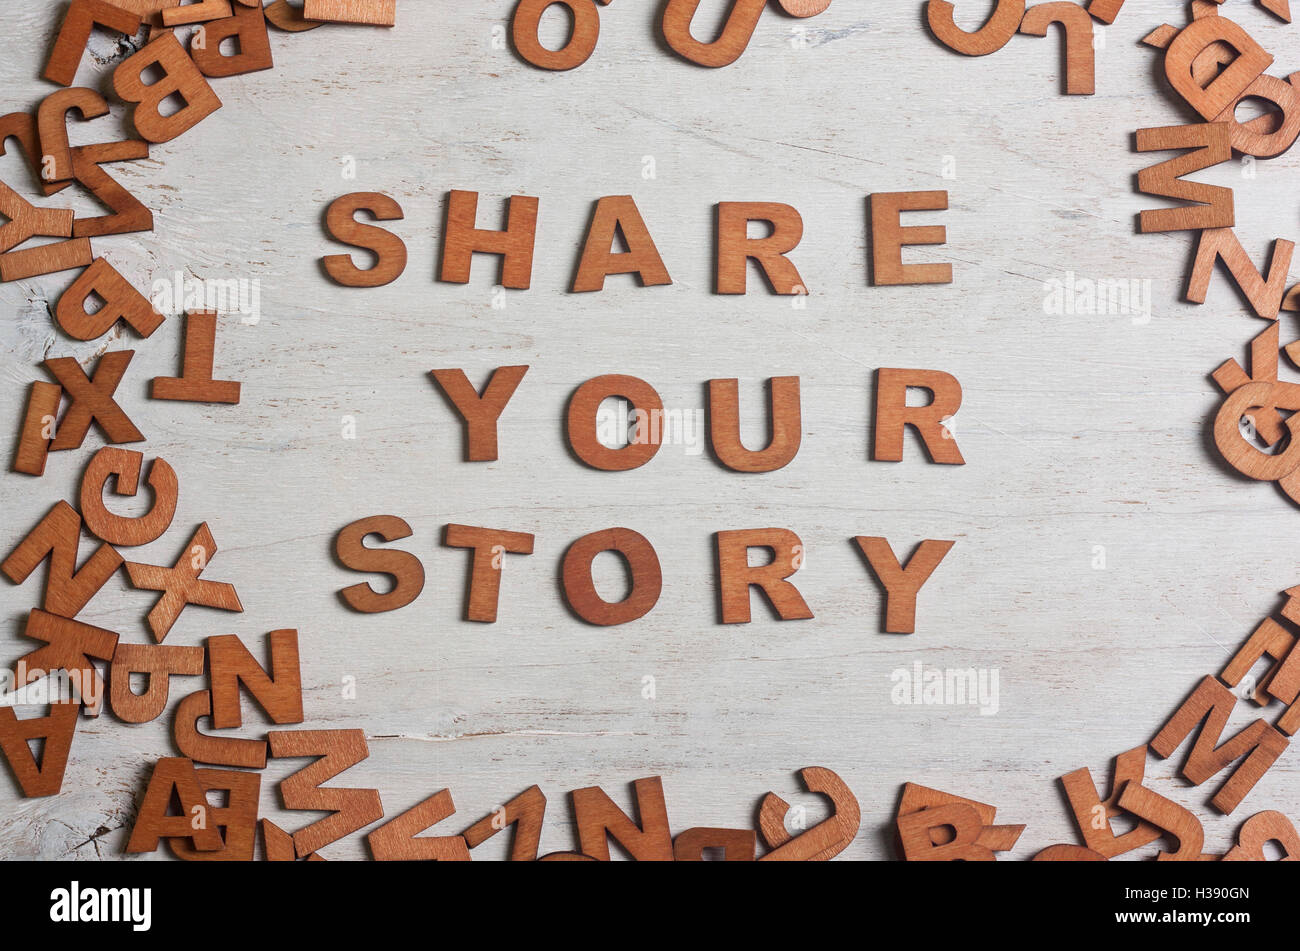 share your story It is written wooden letters Stock Photo